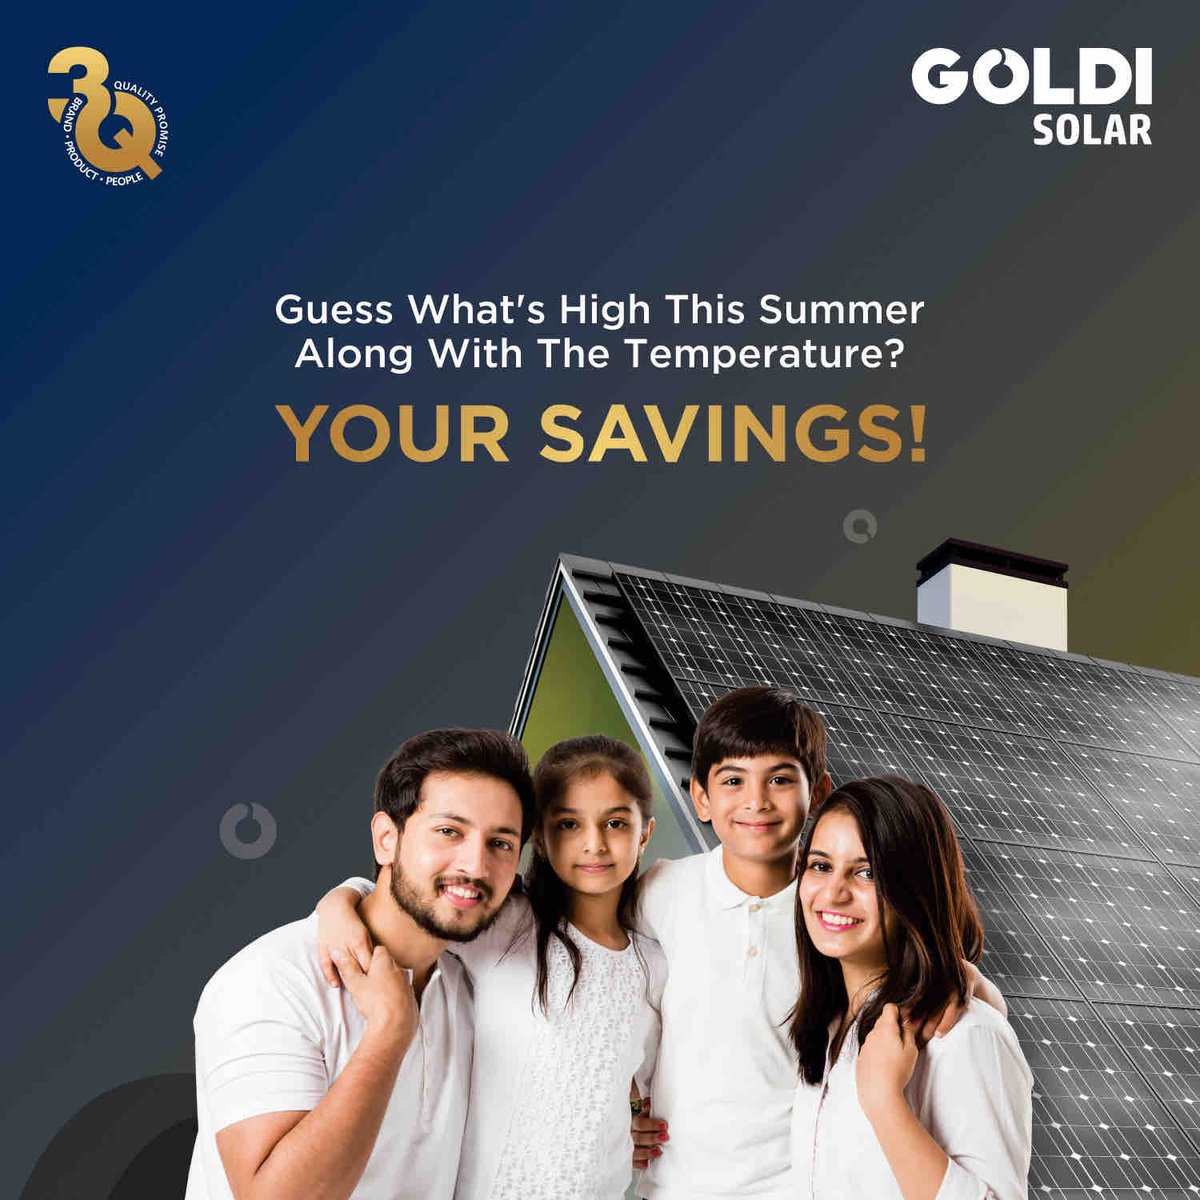 Don’t let the heat burn your pockets. Install Goldi Solar today and save a ton.

#goldi #goldisolar #solarpower #solarenergy #summer #electricitybill #summersavings #savings #sustainbility #sustainable #greenenergy #cleanenergy